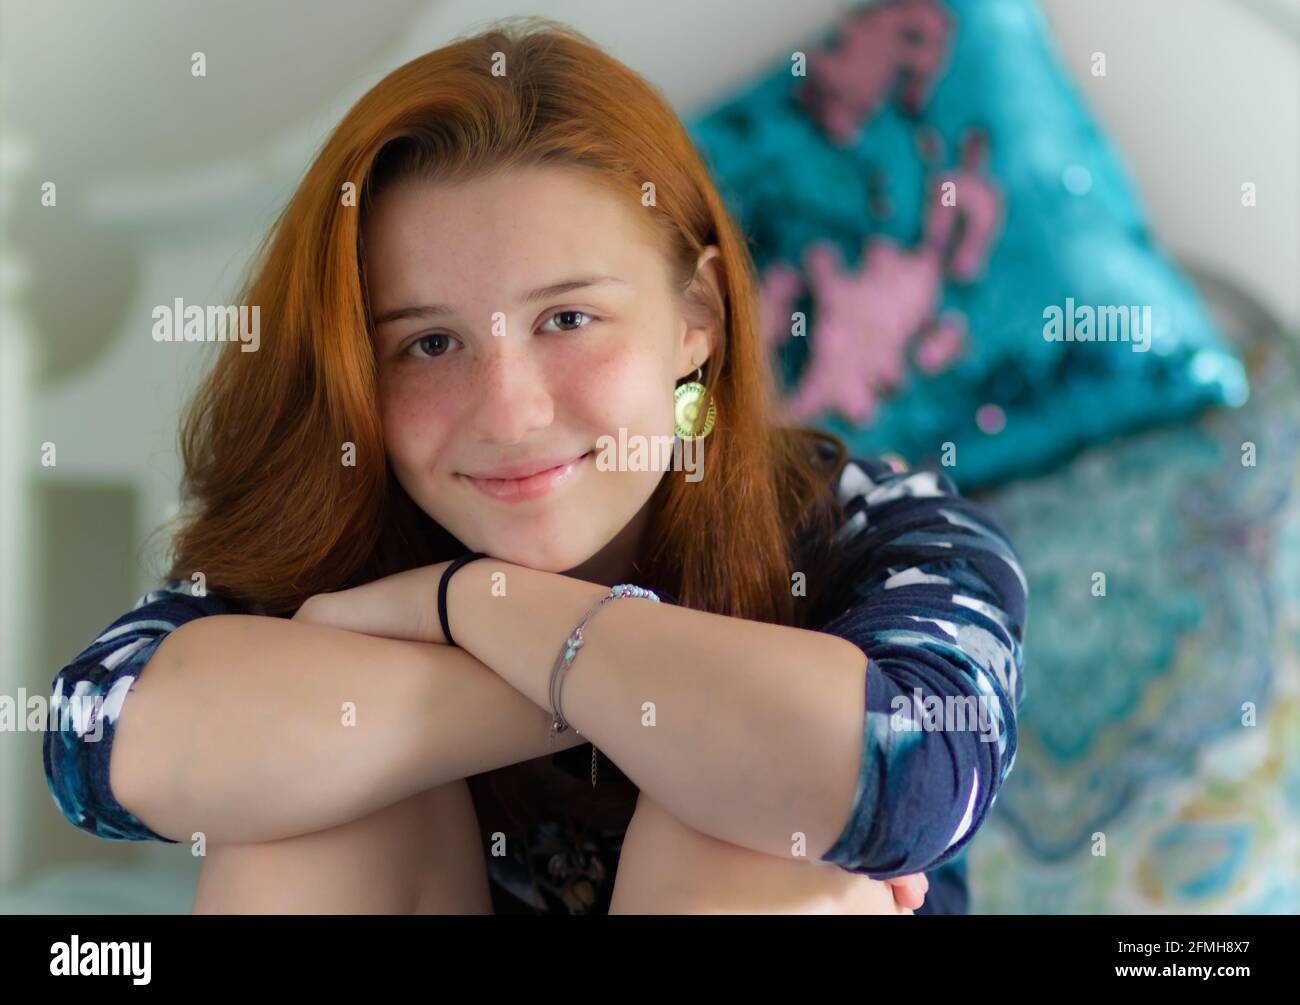 A pretty high school girl or female college student with red hair in bedroom or dormitory room with confident smile and head resting on hands on knees Stock Photo